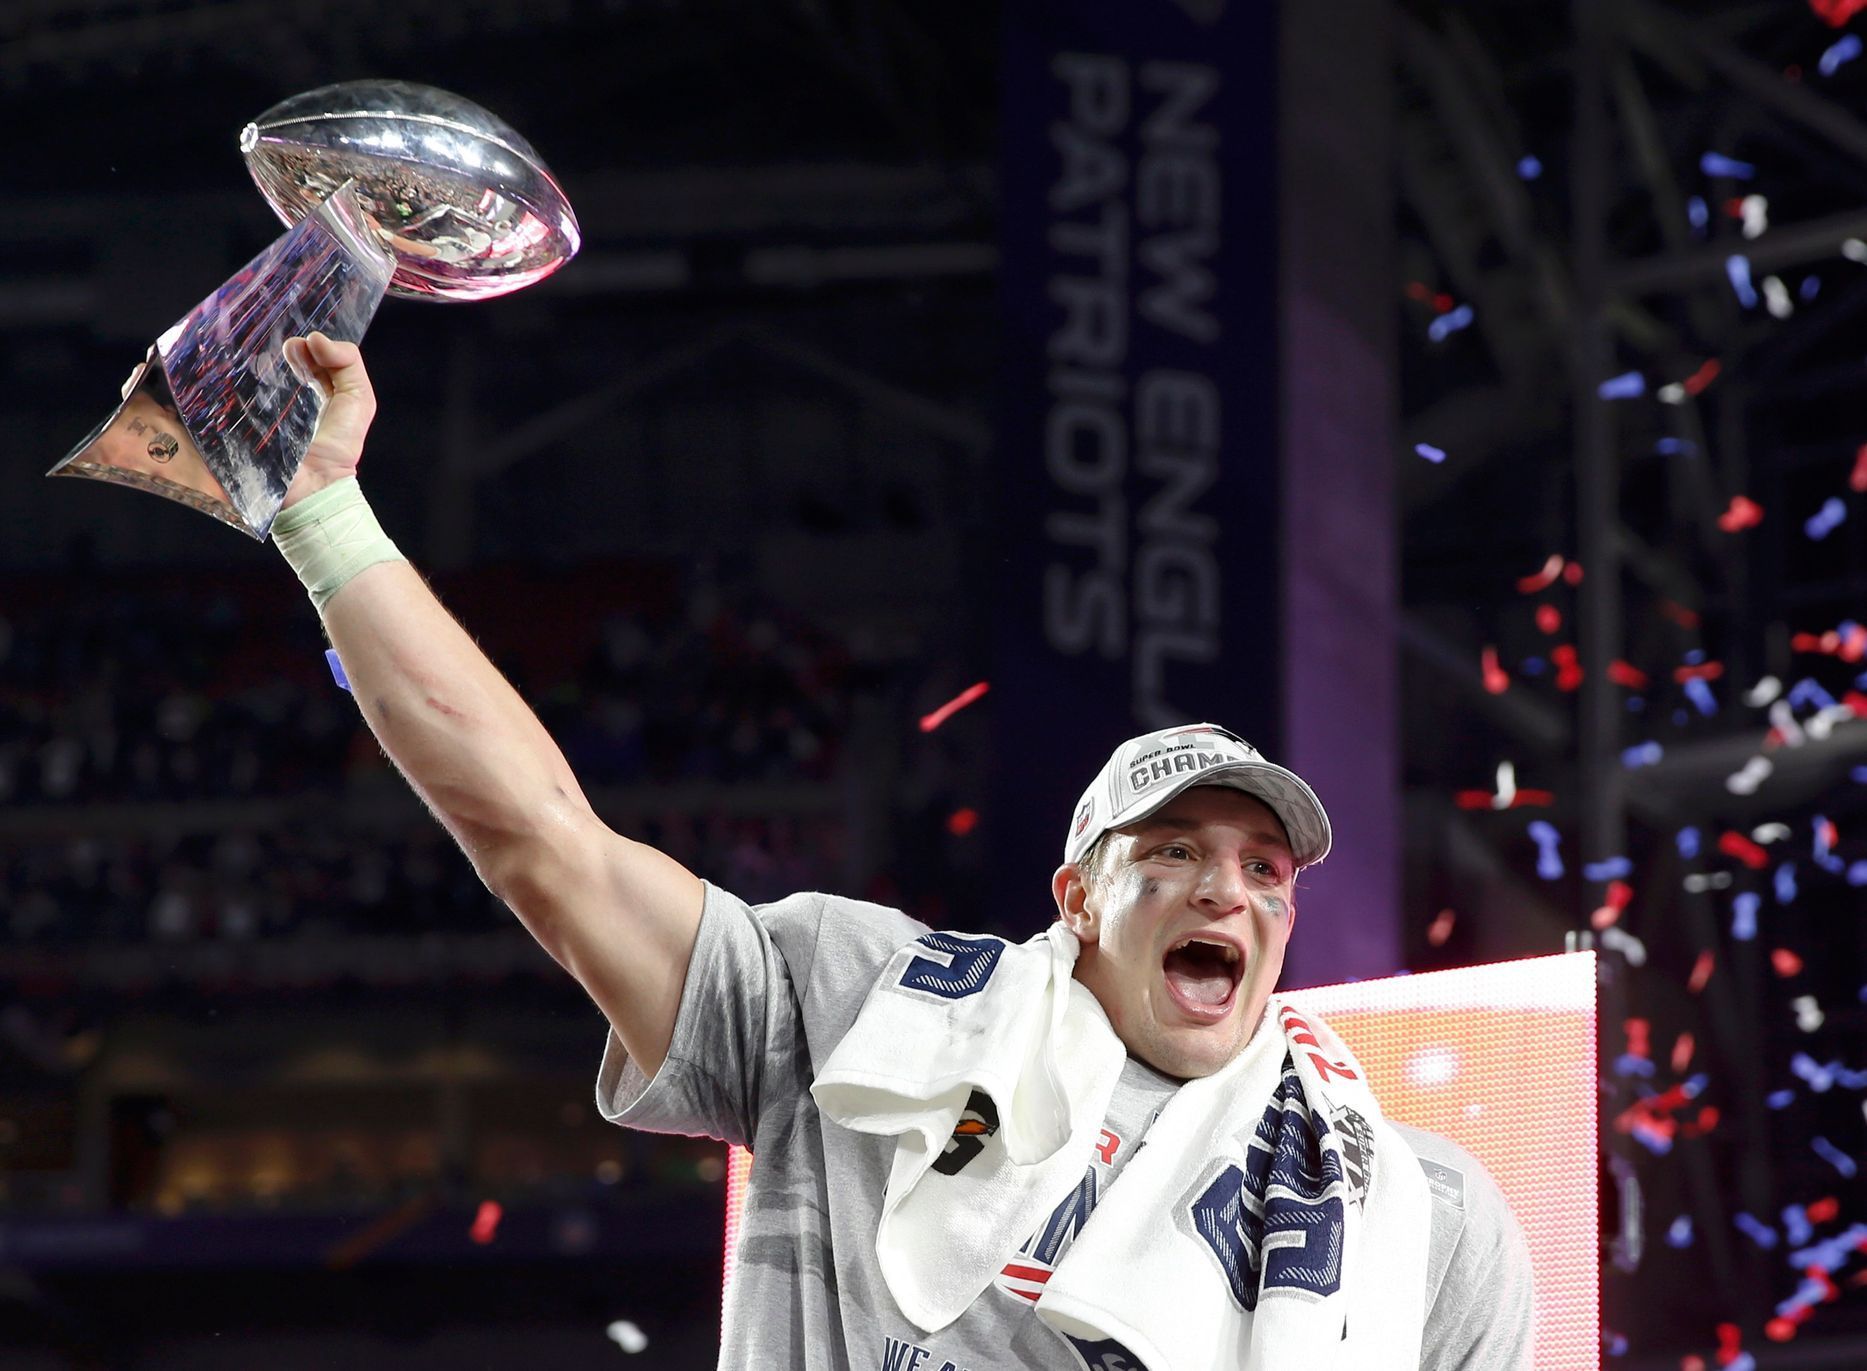 New England Patriots tight end Rob Gronkowski holds up the Vince Lombardi Trophy after his team defeated the Seattle Seahawks in the NFL Super Bowl XLIX football game in Glendale